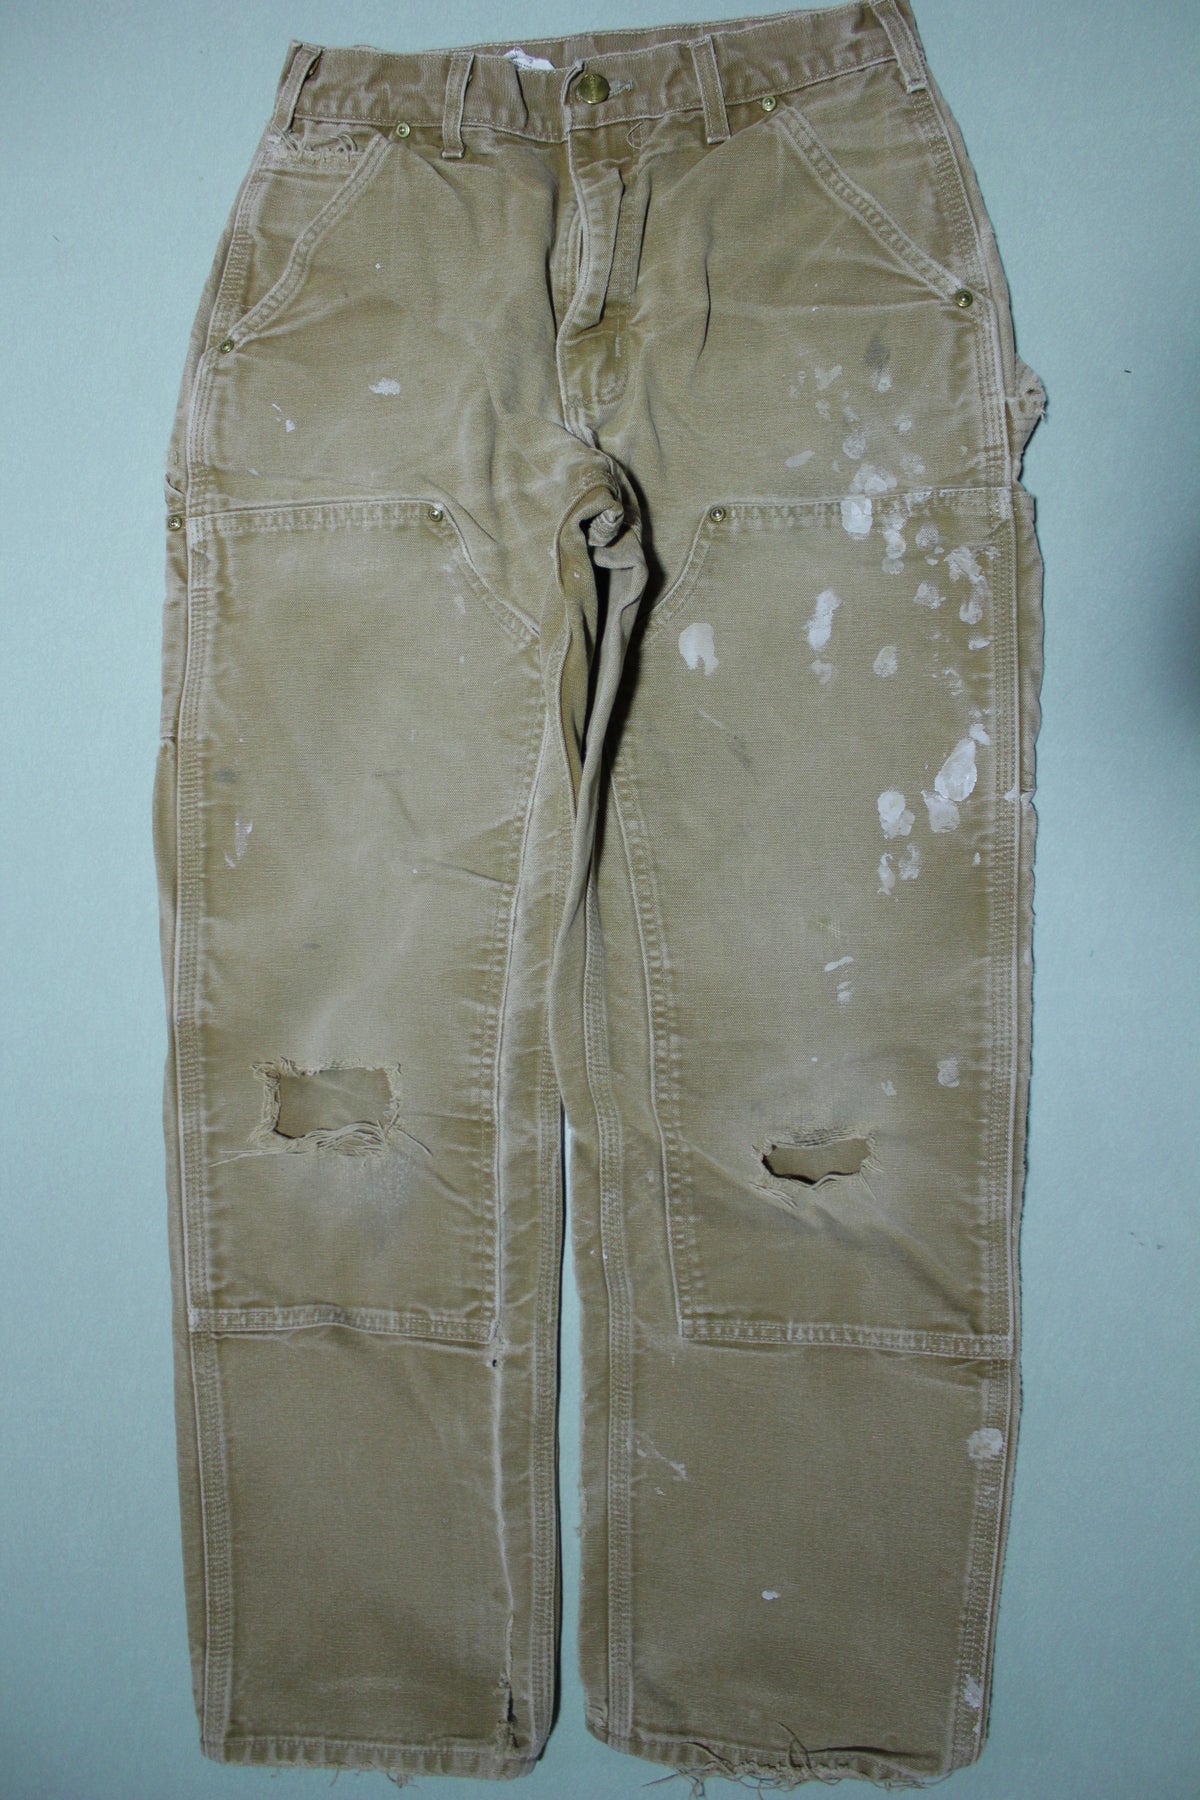 Carhartt Vintage Distressed B01 Double Knee Front Work Construction Utility Pants BRN